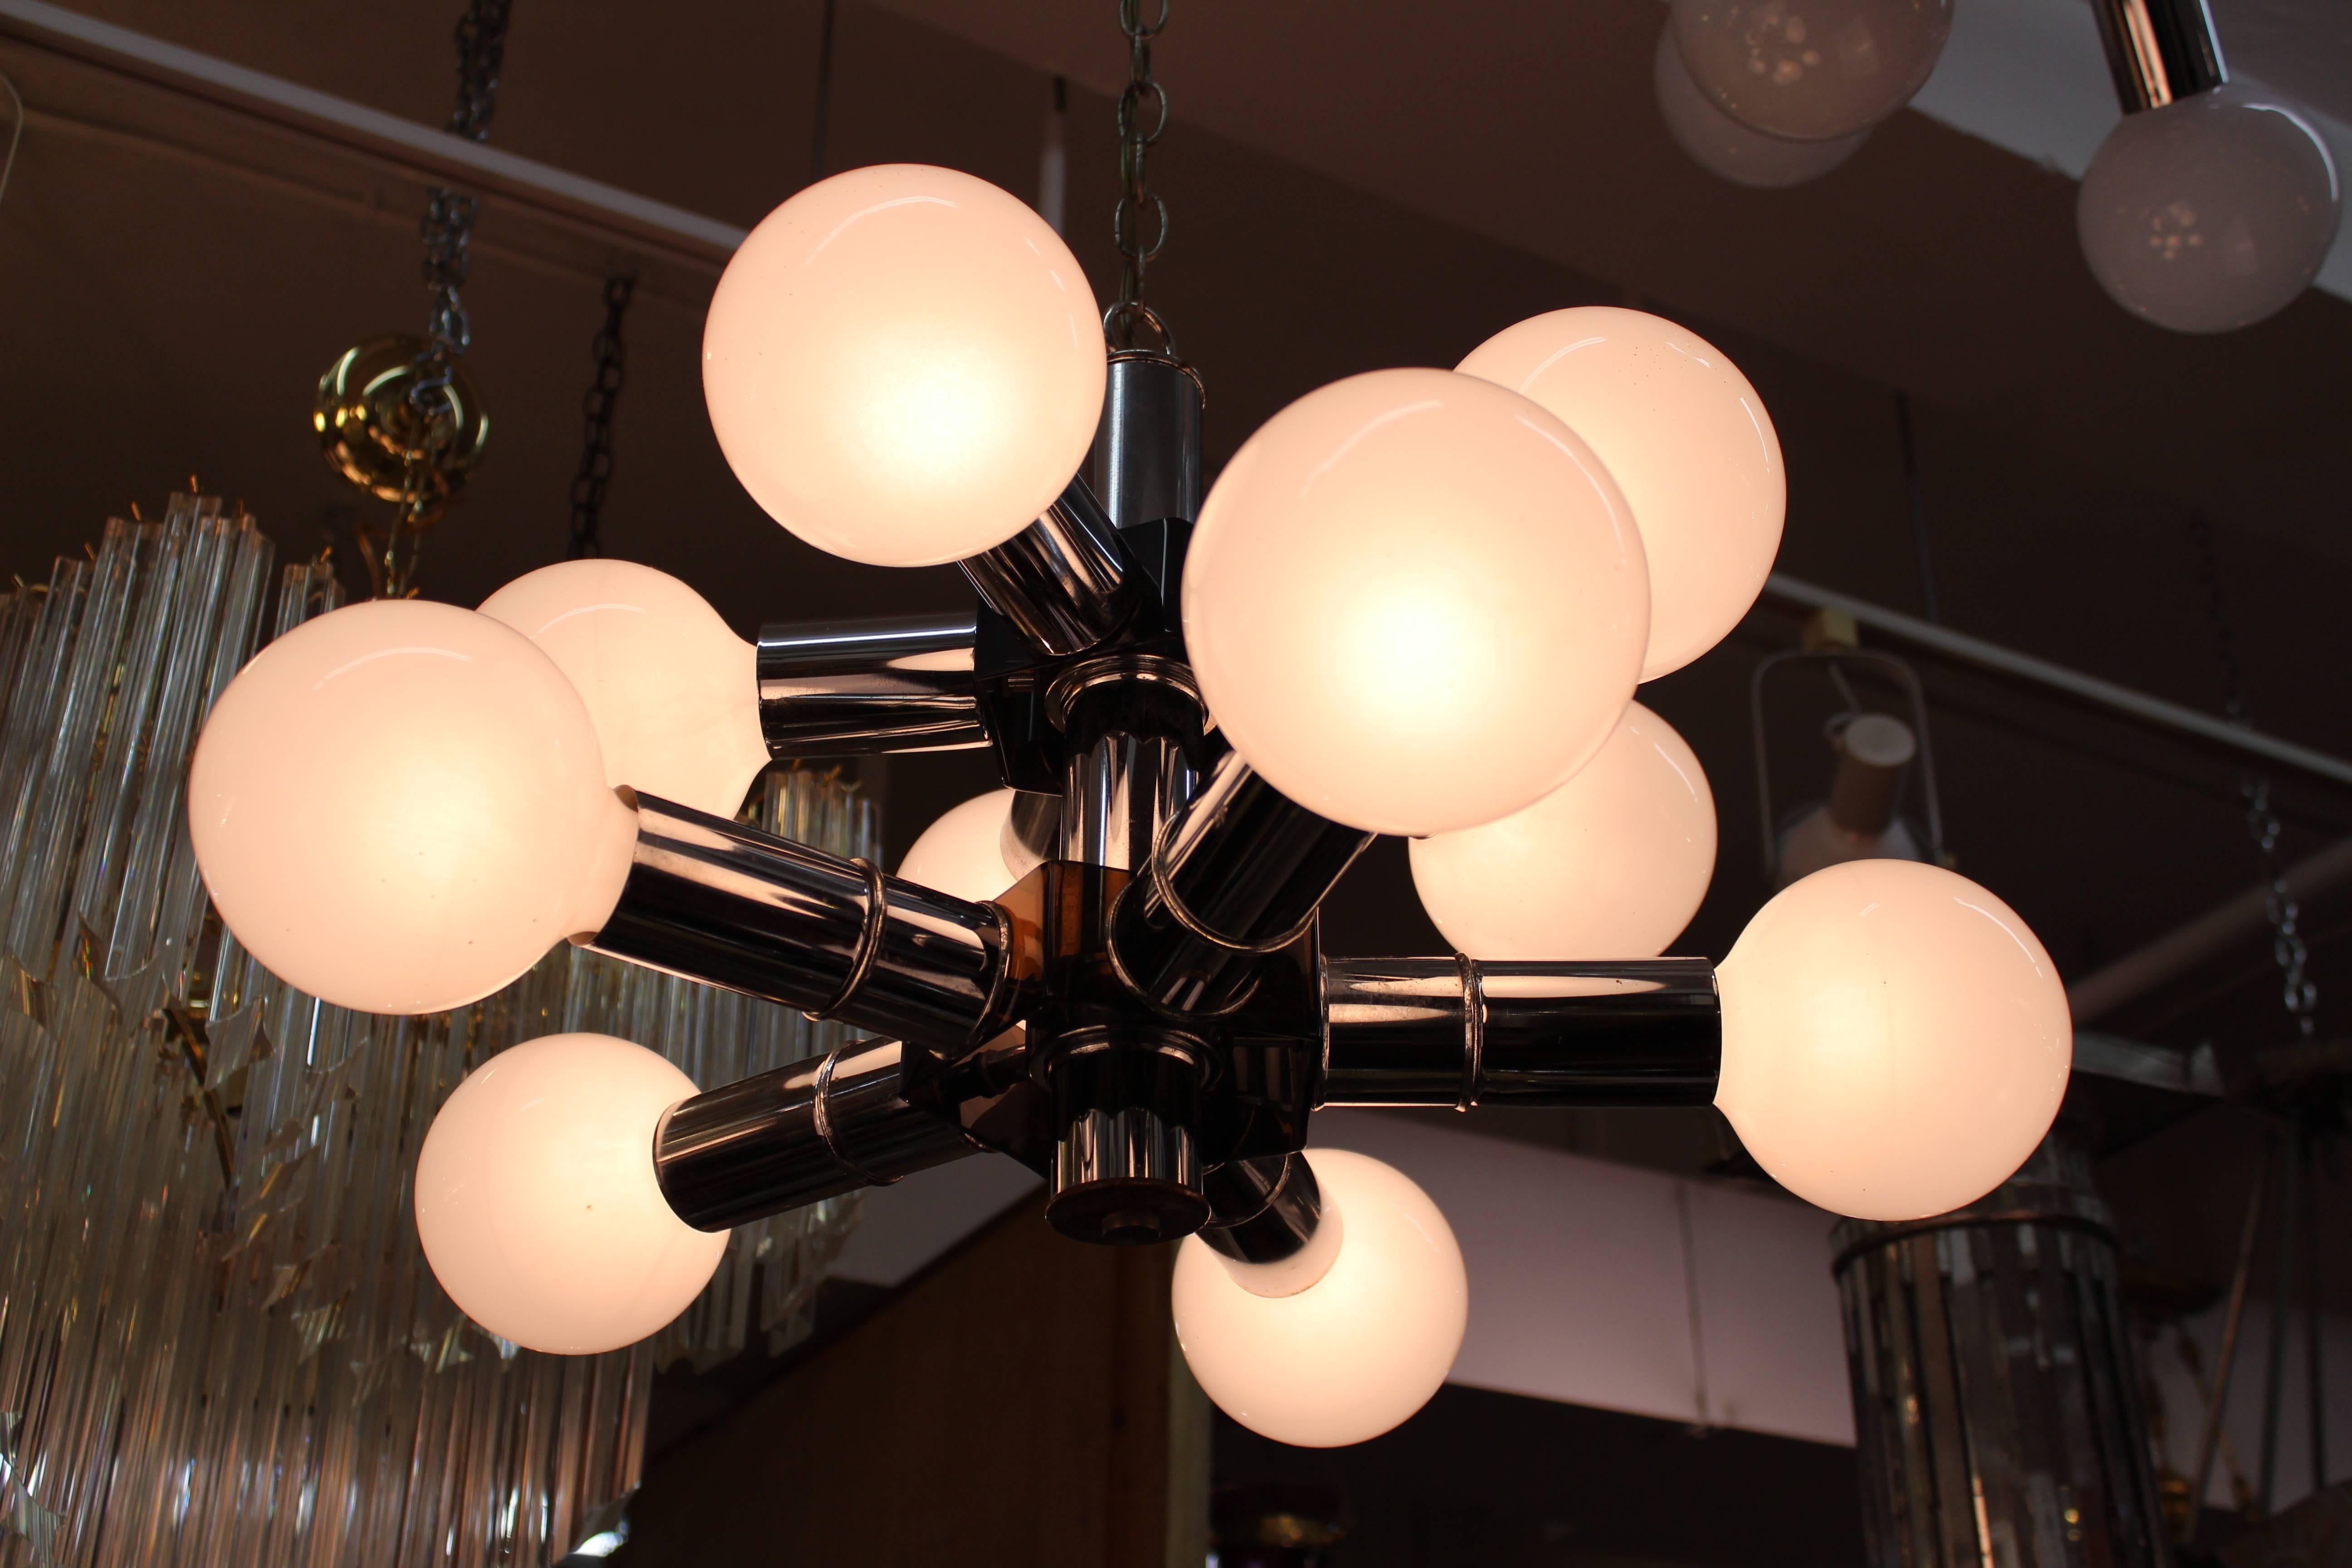 Mid-Century Modern molecular style chandelier with a two-tiered chrome structure and white glass globes, made during the Atomic age. The piece is in great vintage condition.